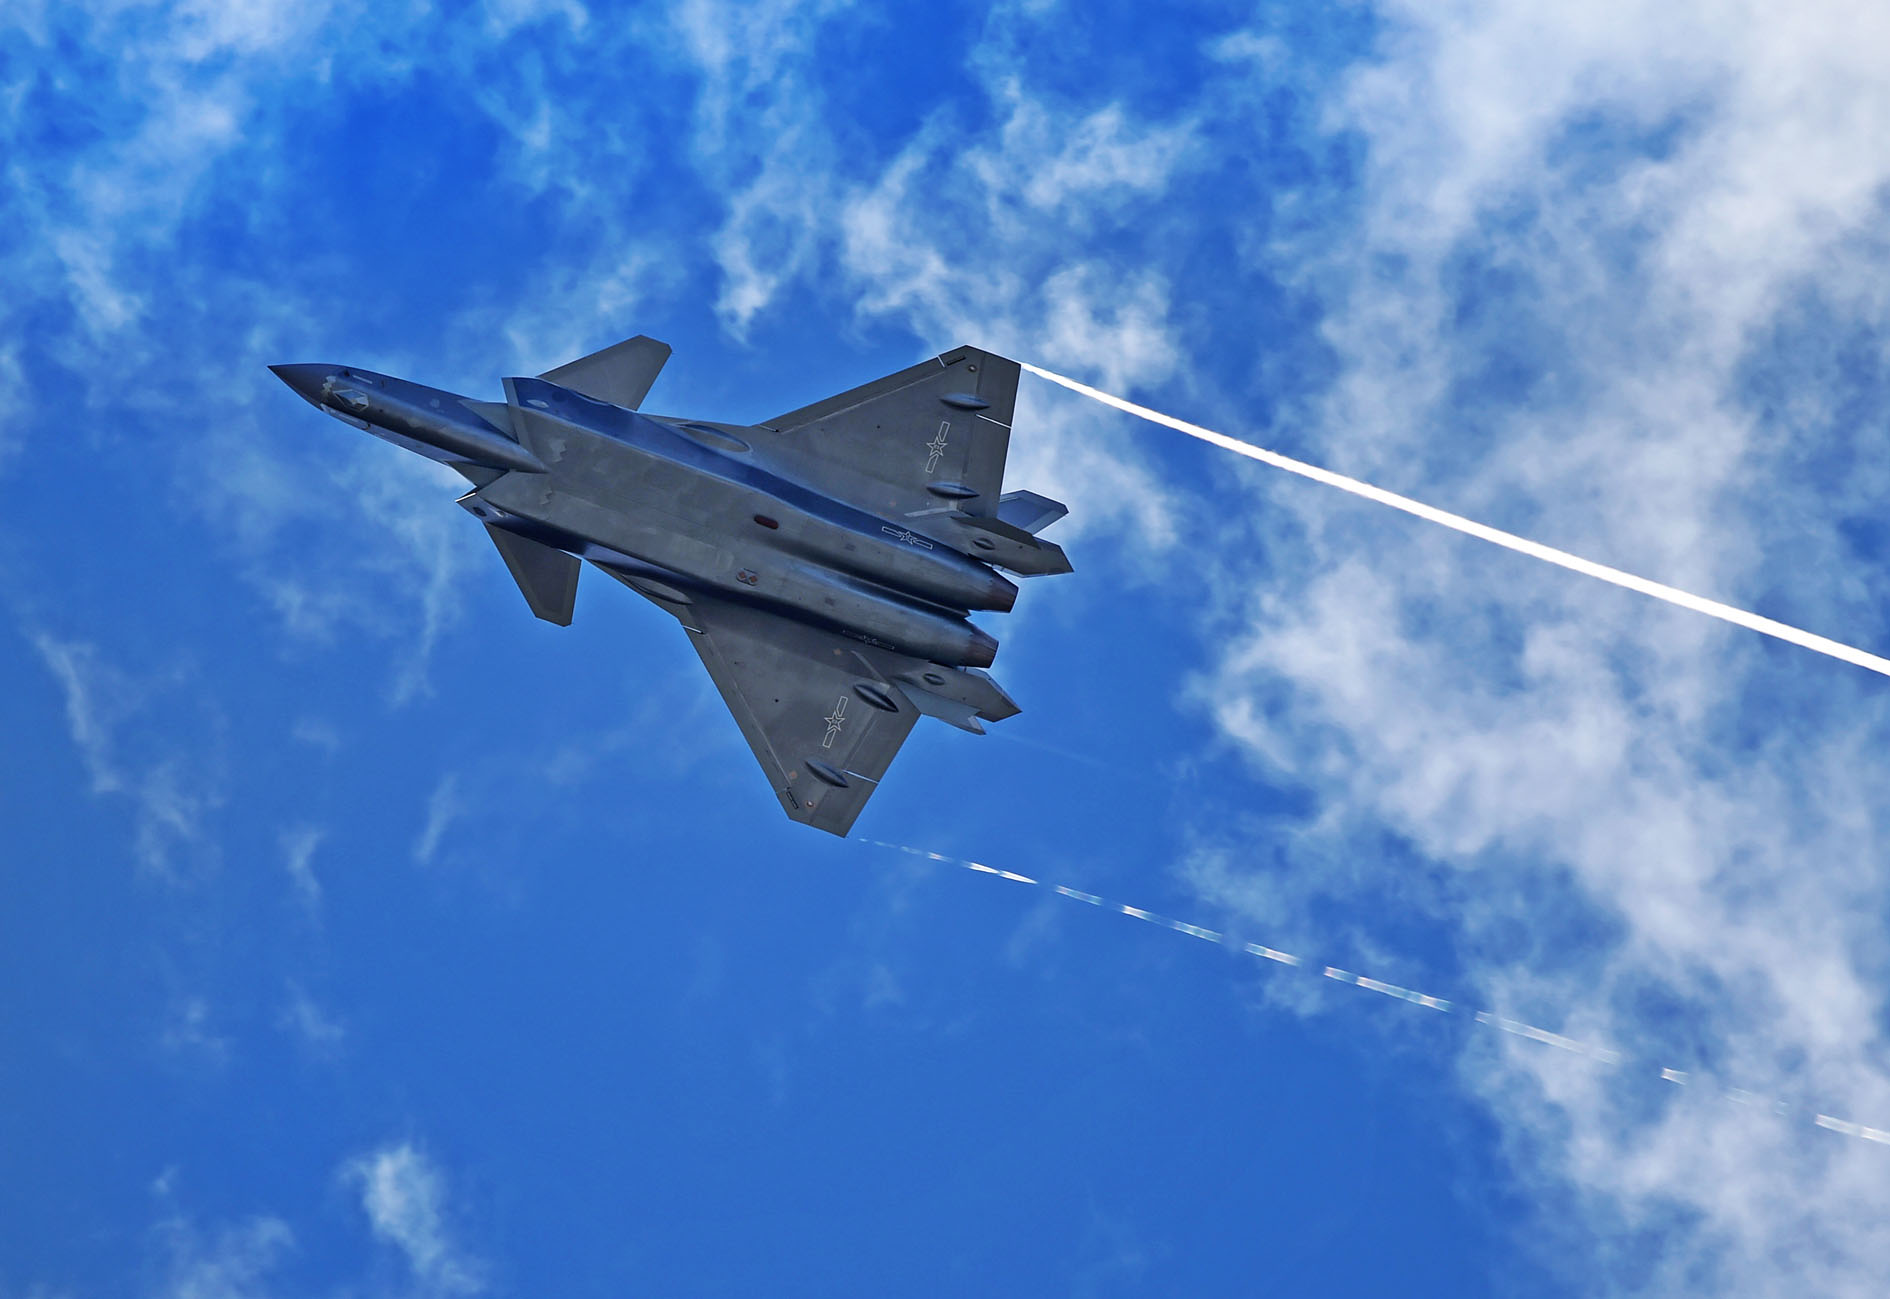 General 1890x1299 China aircraft vehicle military aircraft military Chengdu J-20 wingtip vortices clouds